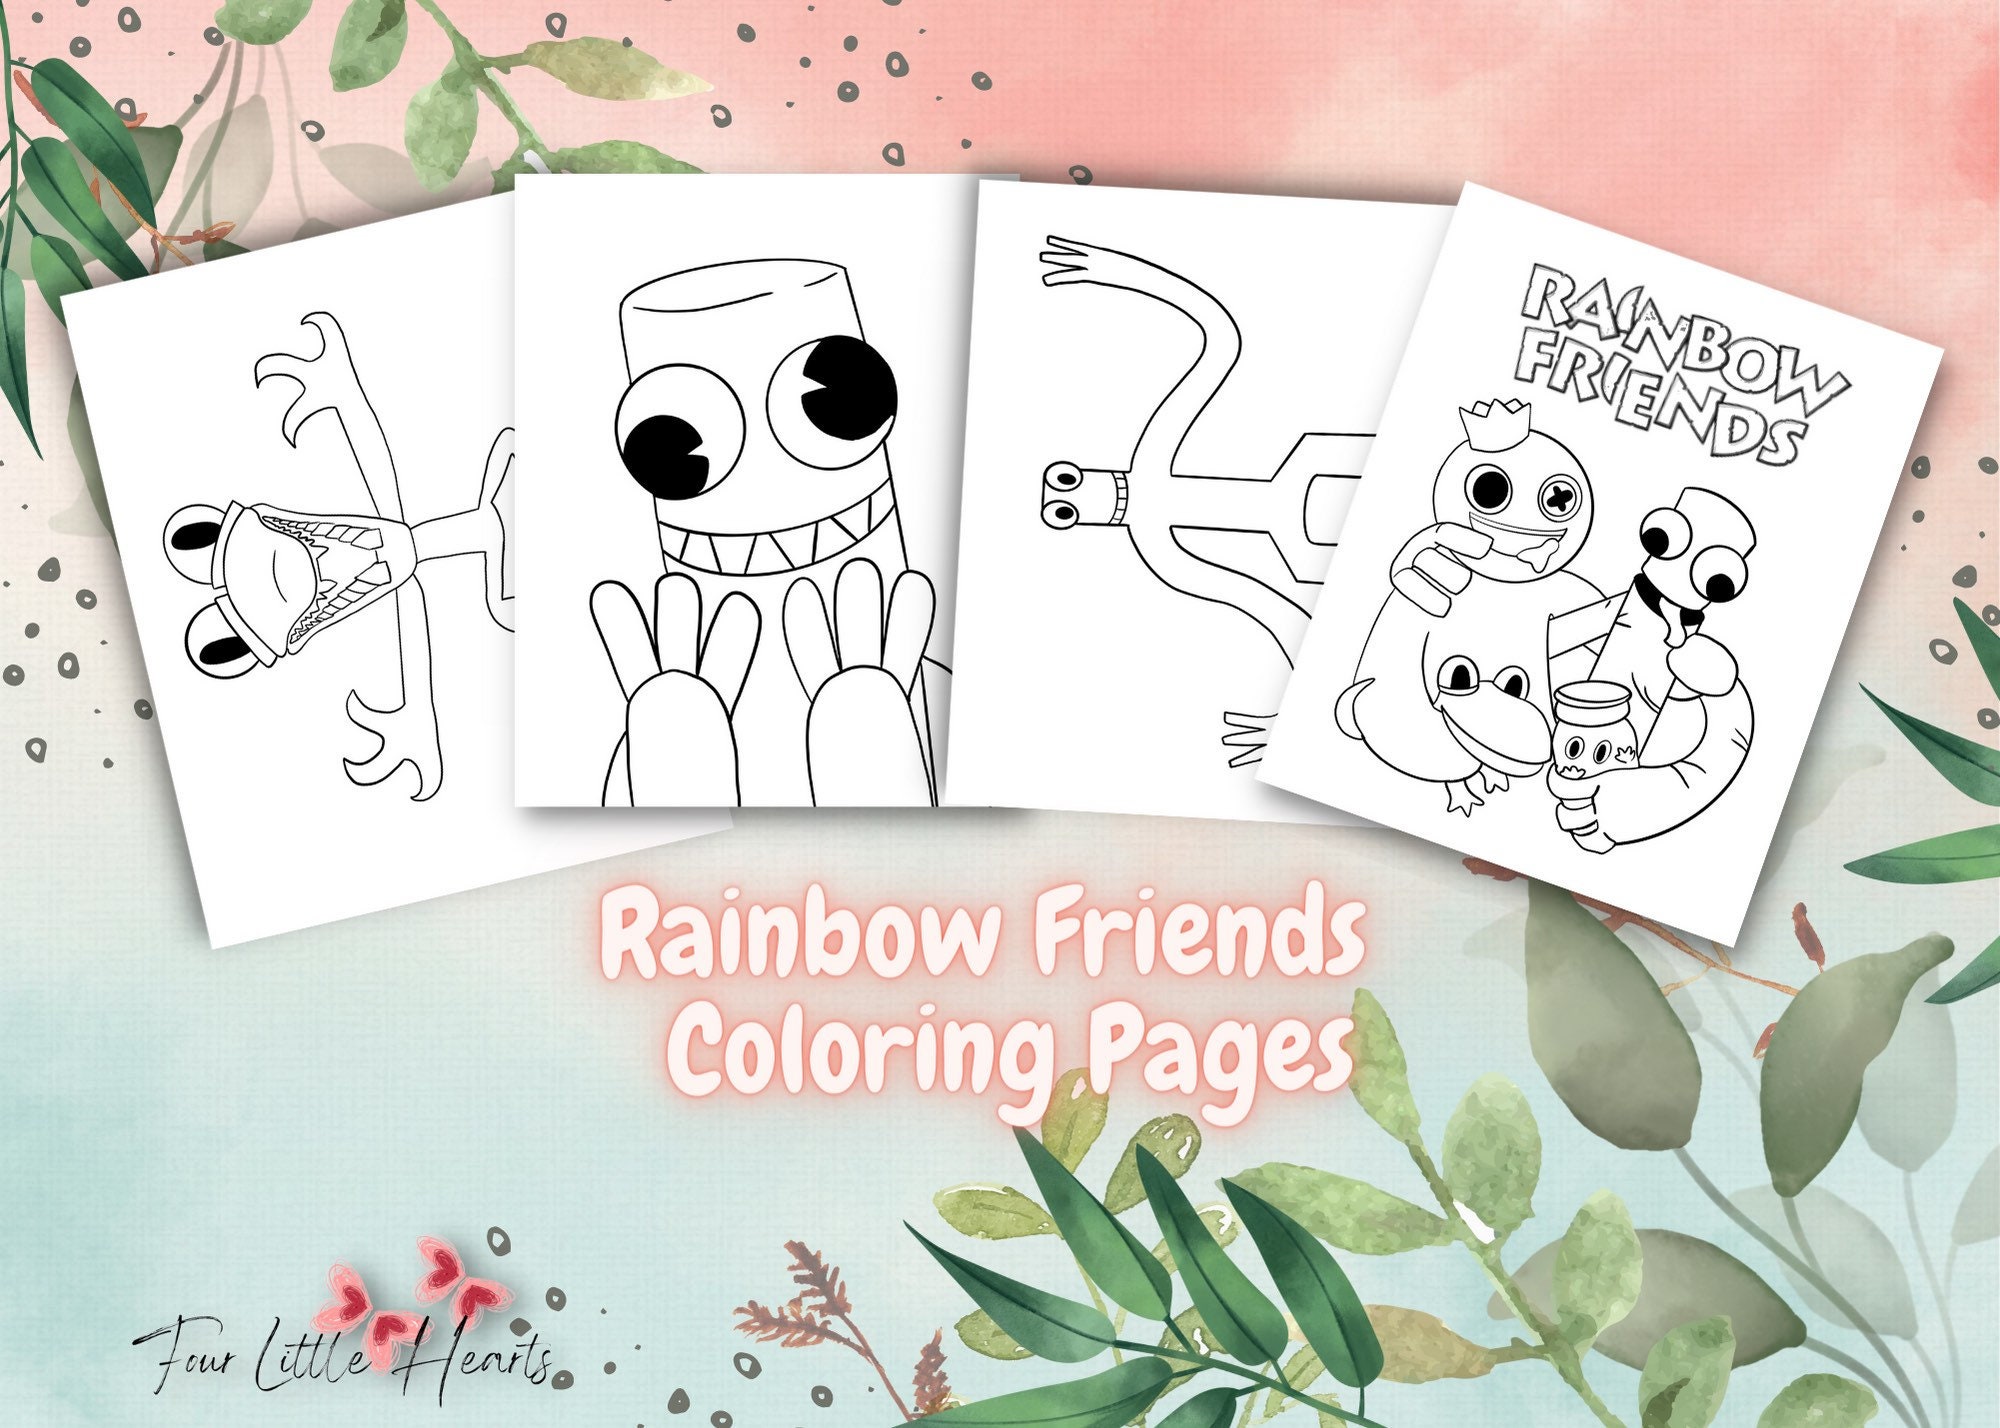 Blue Rainbow Friends Roblox Coloring Page  Coloring pages, Printable  coloring pages, Blue drawings